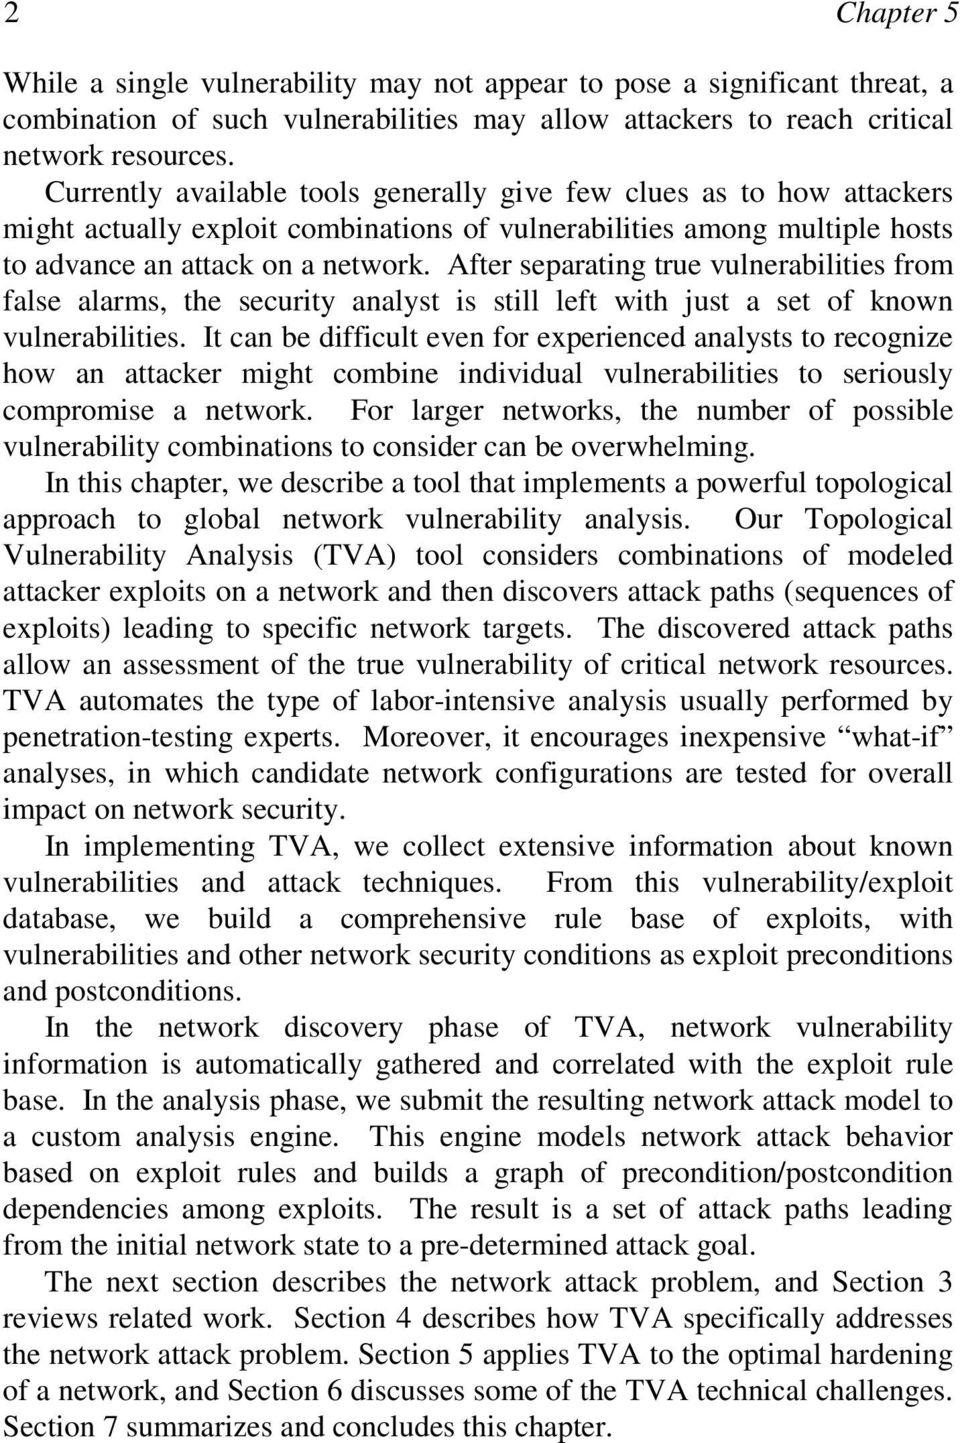 After separating true vulnerabilities from false alarms, the security analyst is still left with ust a set of known vulnerabilities.